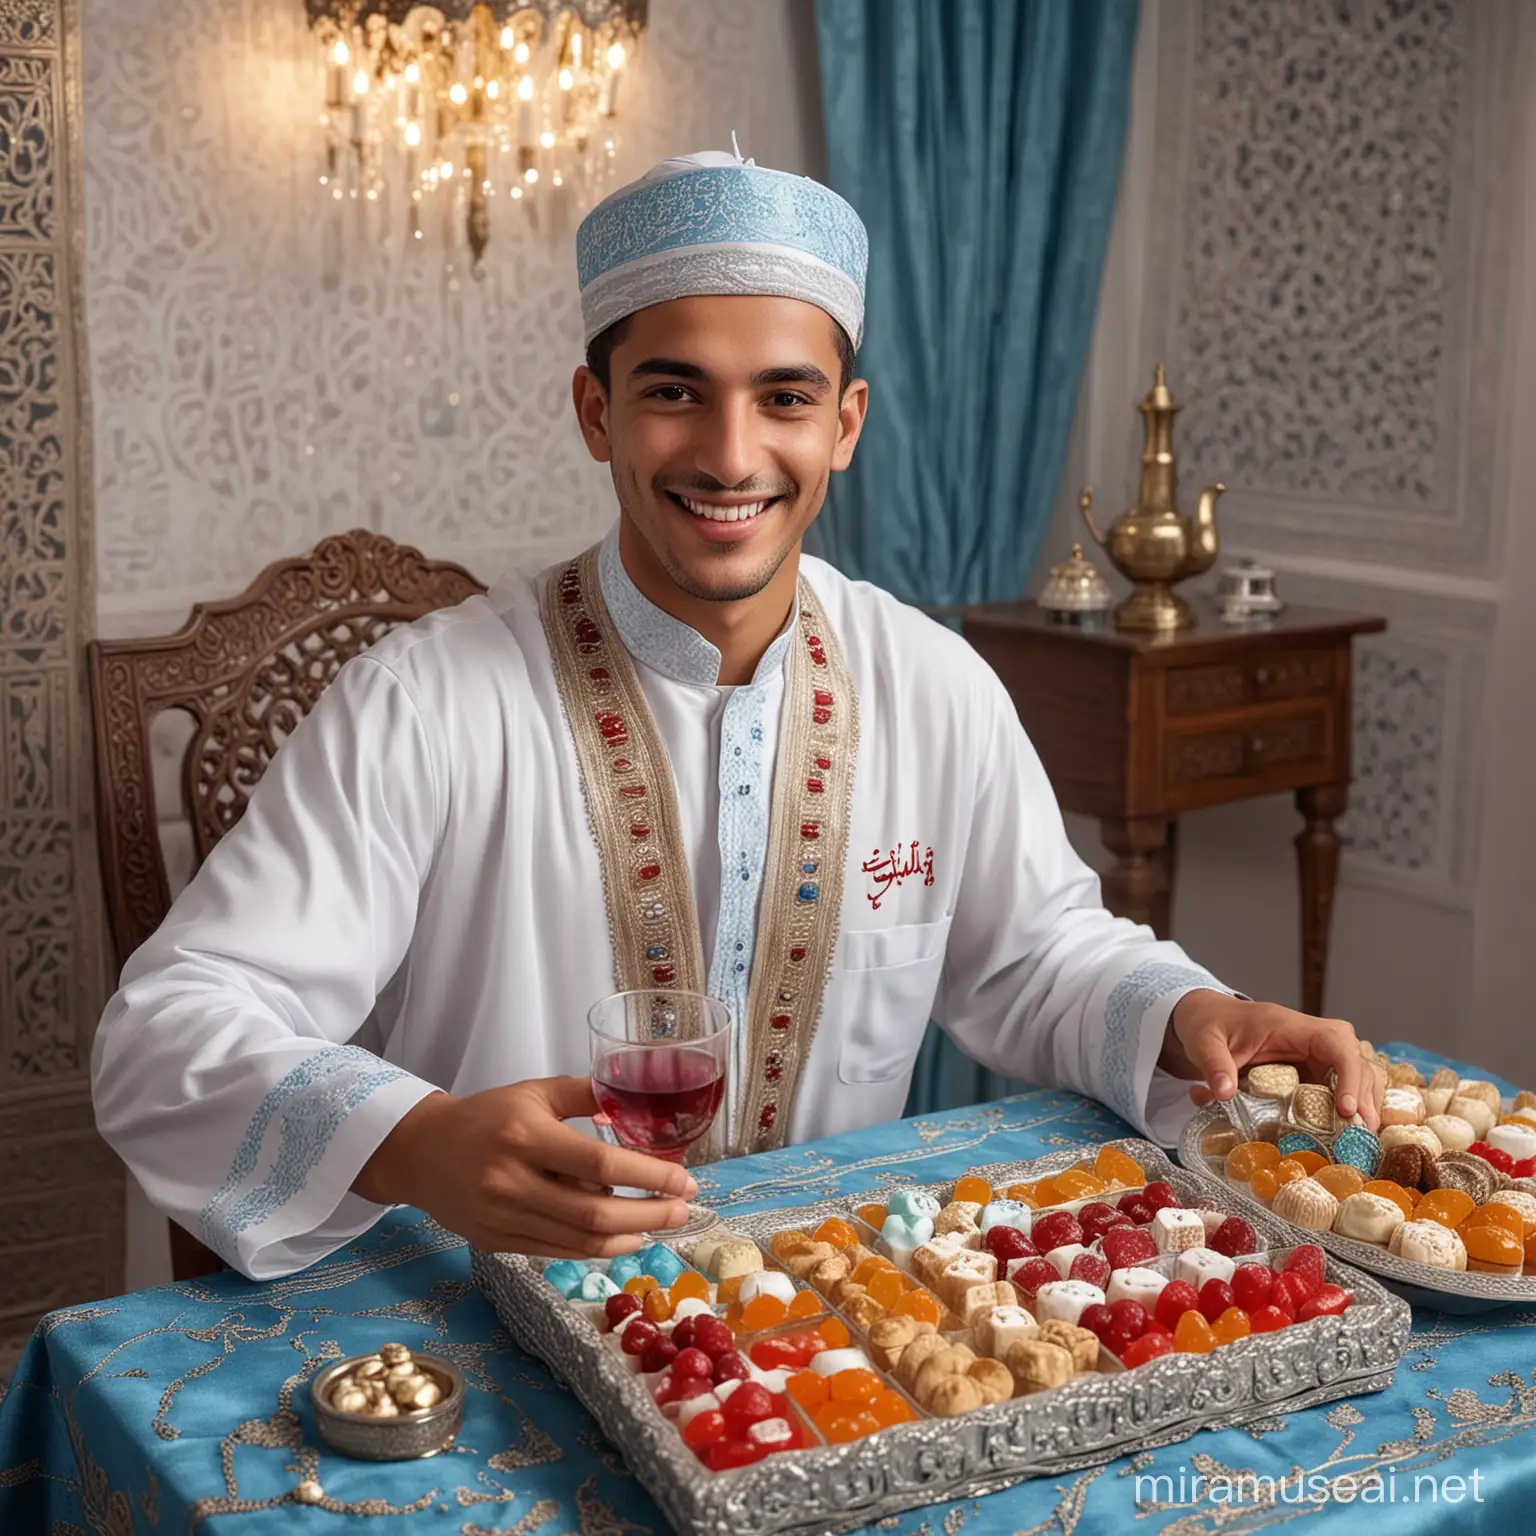 A real picture of a smiling, elegant Moroccan young man celebrating Eid al-Fitr. In front of him is a table with a variety of sweets and tea. He is wearing a half-white and half-BLUE robe. Behind him is the name “Karim” written in red crystal, and in his hands is the phrase “Eid mubarak.” A high-quality, realistic picture.hd, 4k